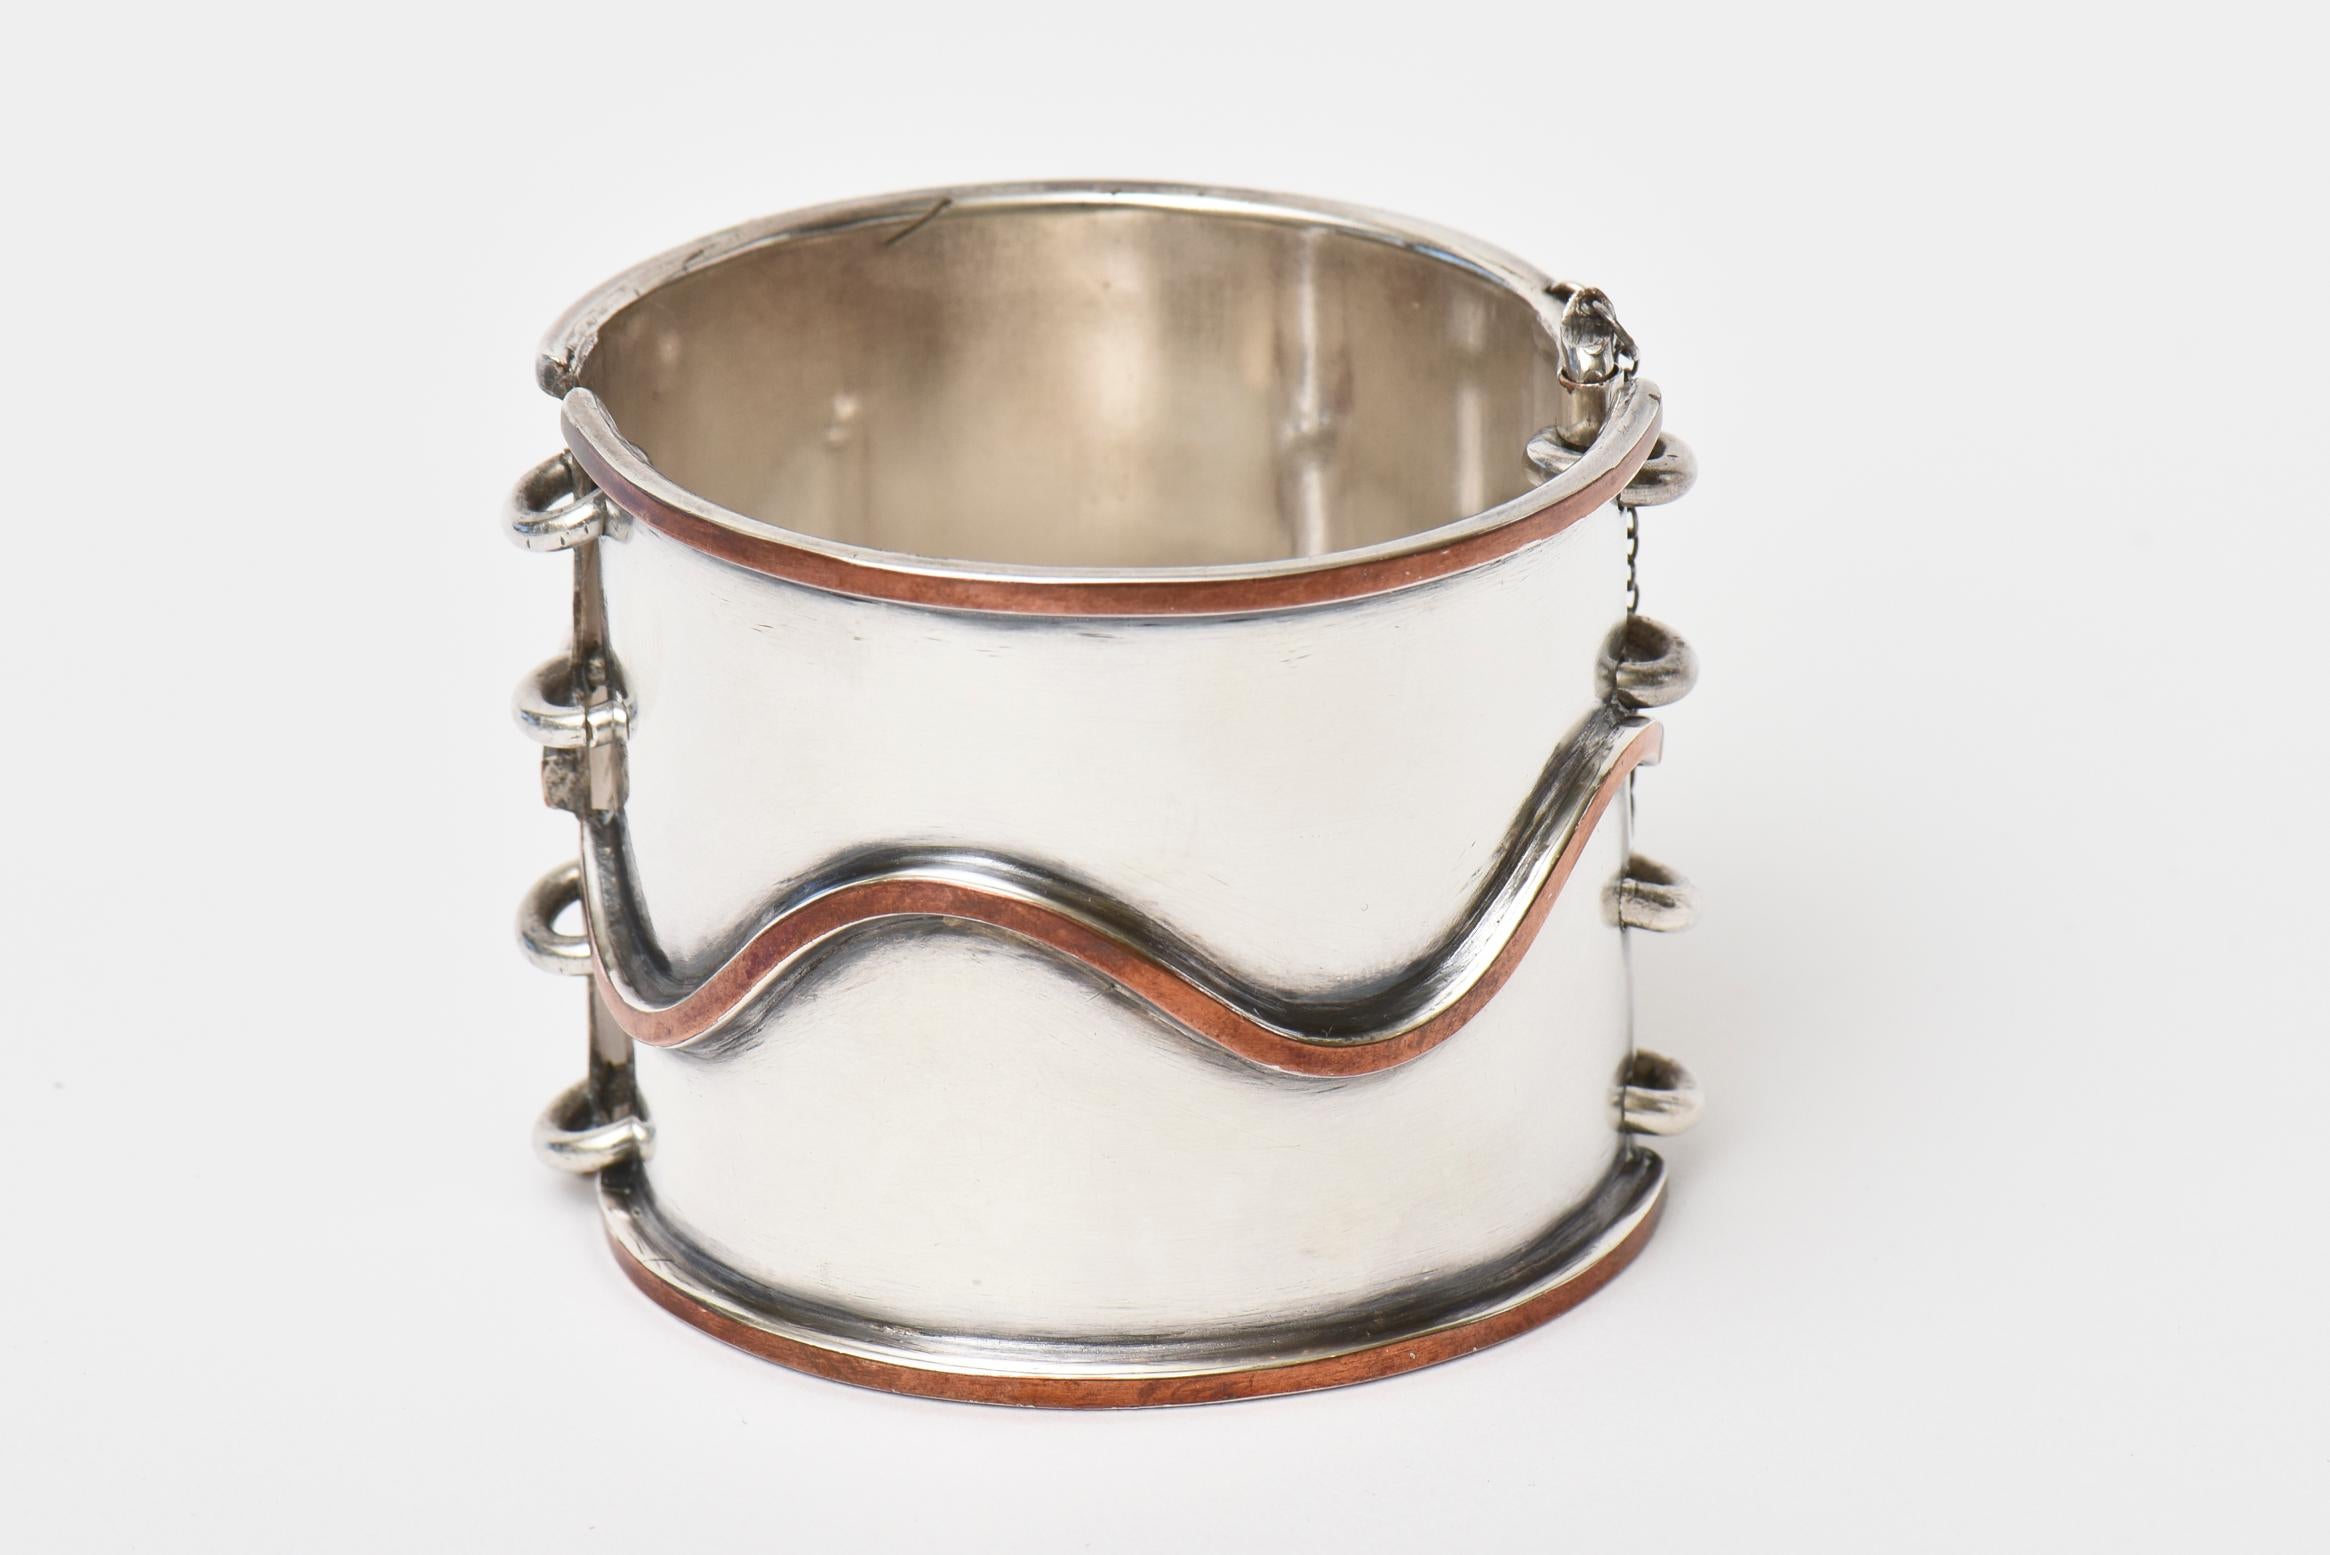 This modernist vintage chrome and copper cuff bracelet has a pin for closing with 4 rings. It is for a small wrist of a size 6 or smaller. This is from the 70's.